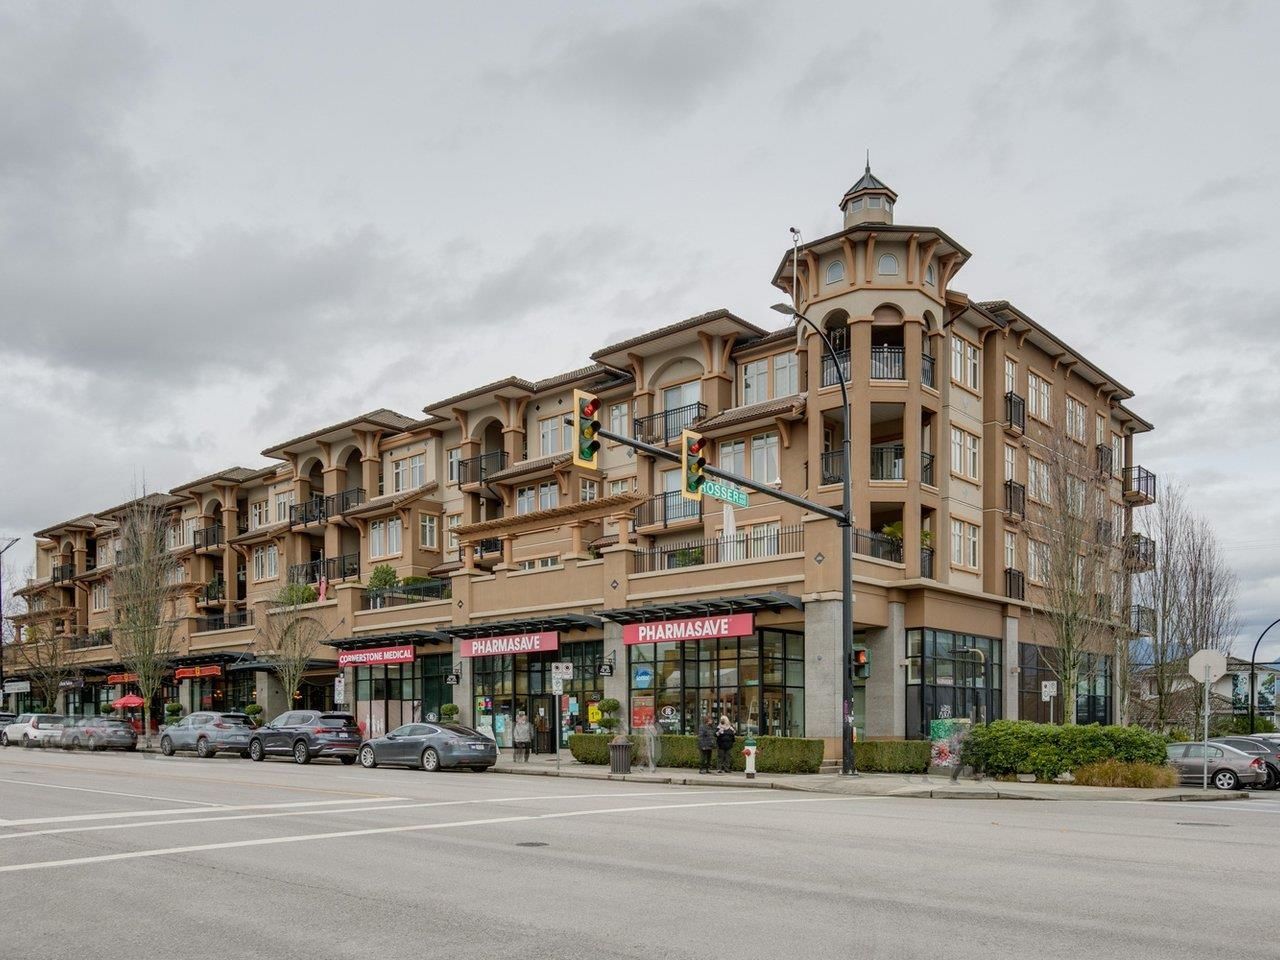 Main Photo: 303 4365 HASTINGS STREET in Burnaby: Vancouver Heights Condo for sale (Burnaby North)  : MLS®# R2631112